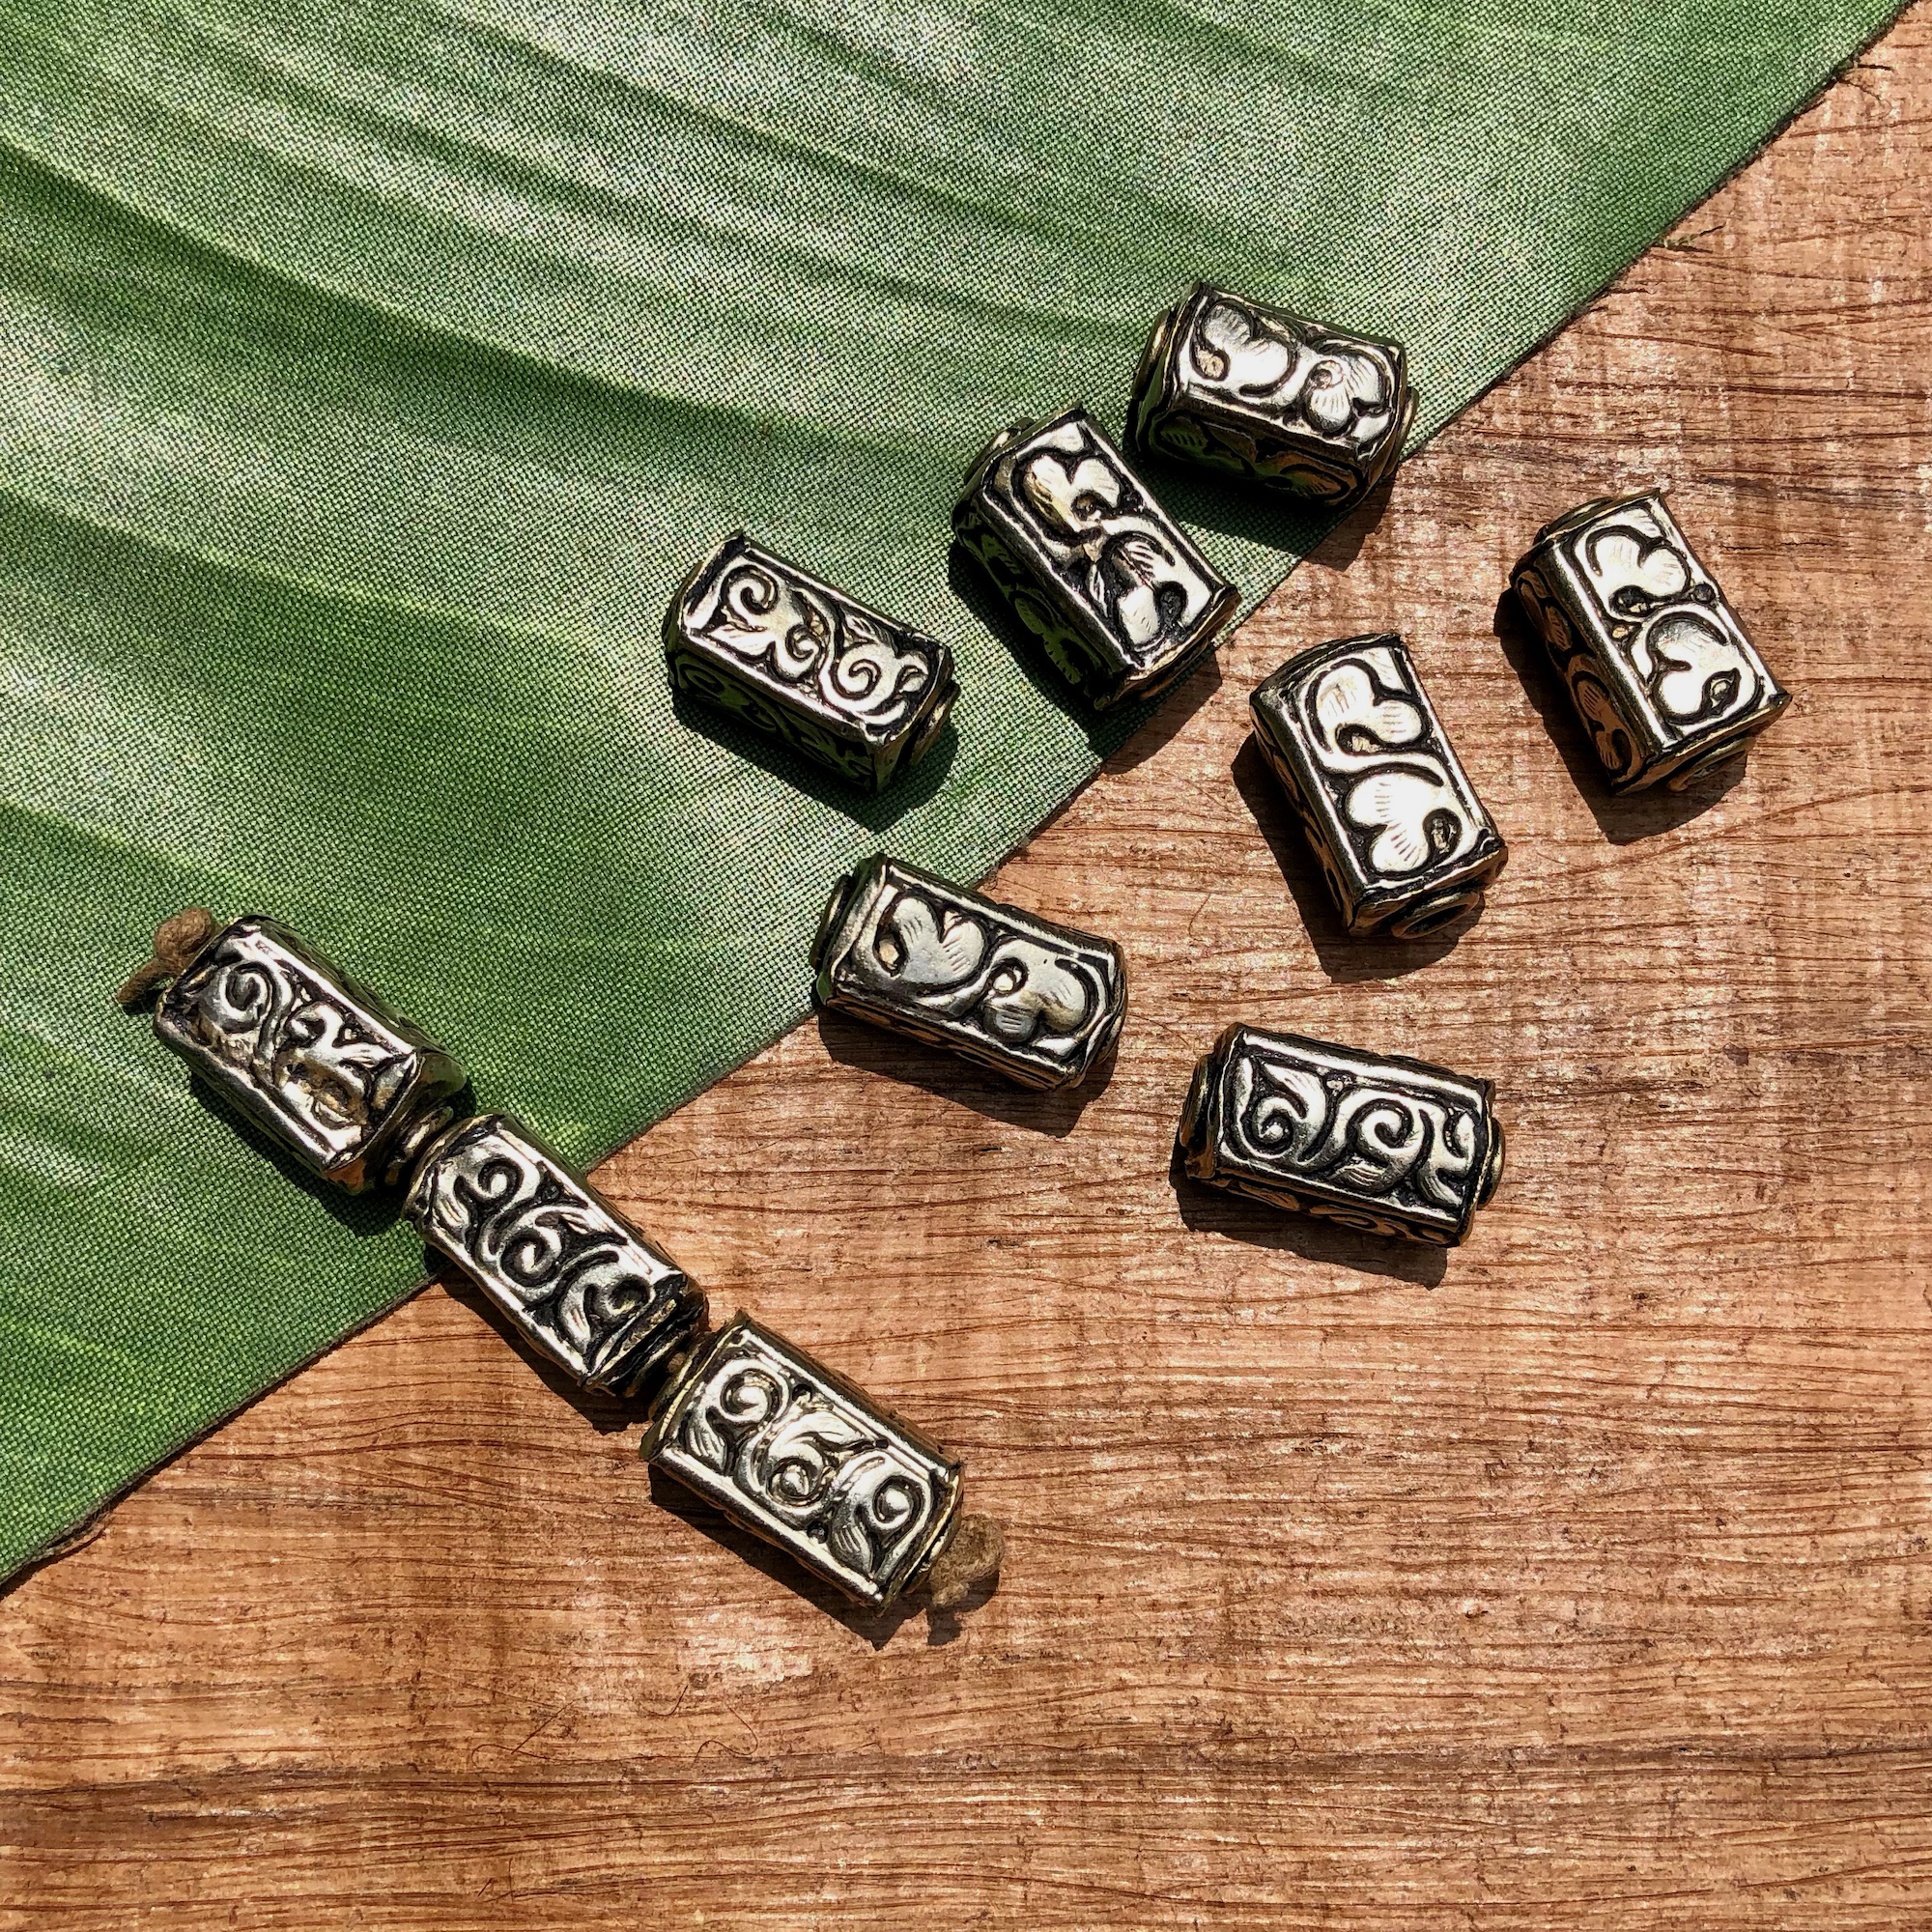 Carved Rectangle Metal Beads - 5 Piece